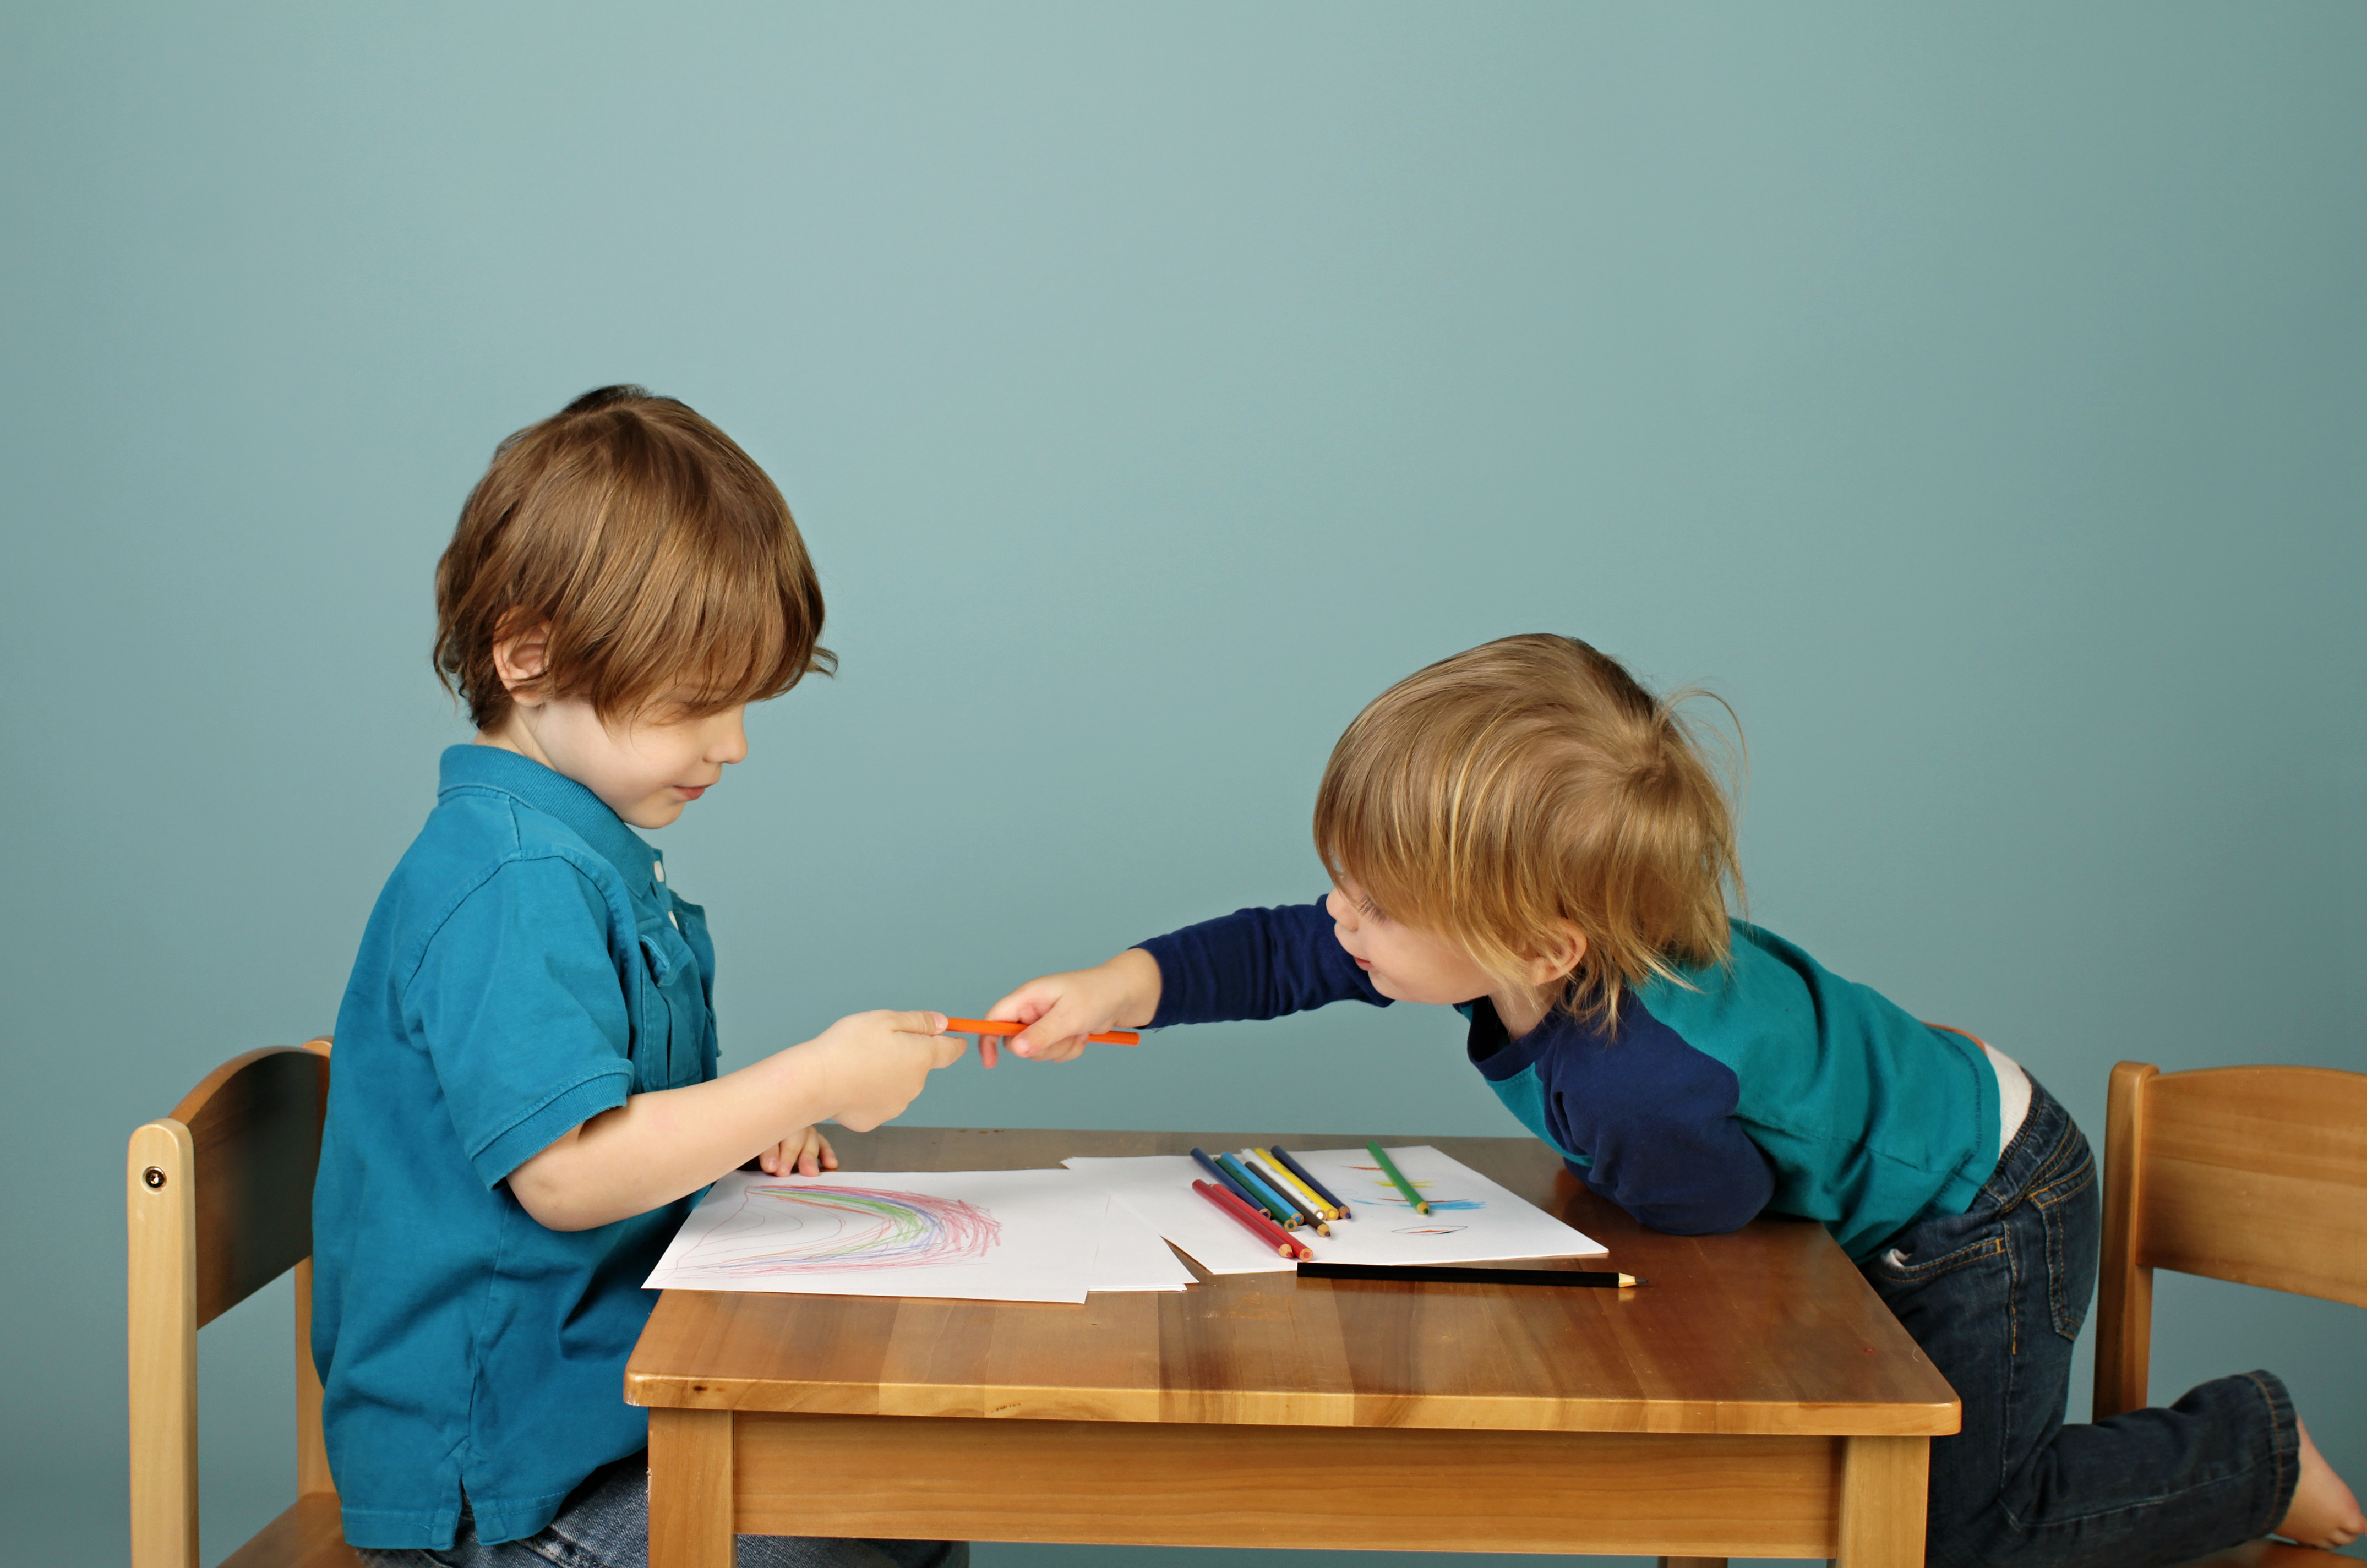 Teach Kids How To Share image of two boys sharing colored pencils while drawing.